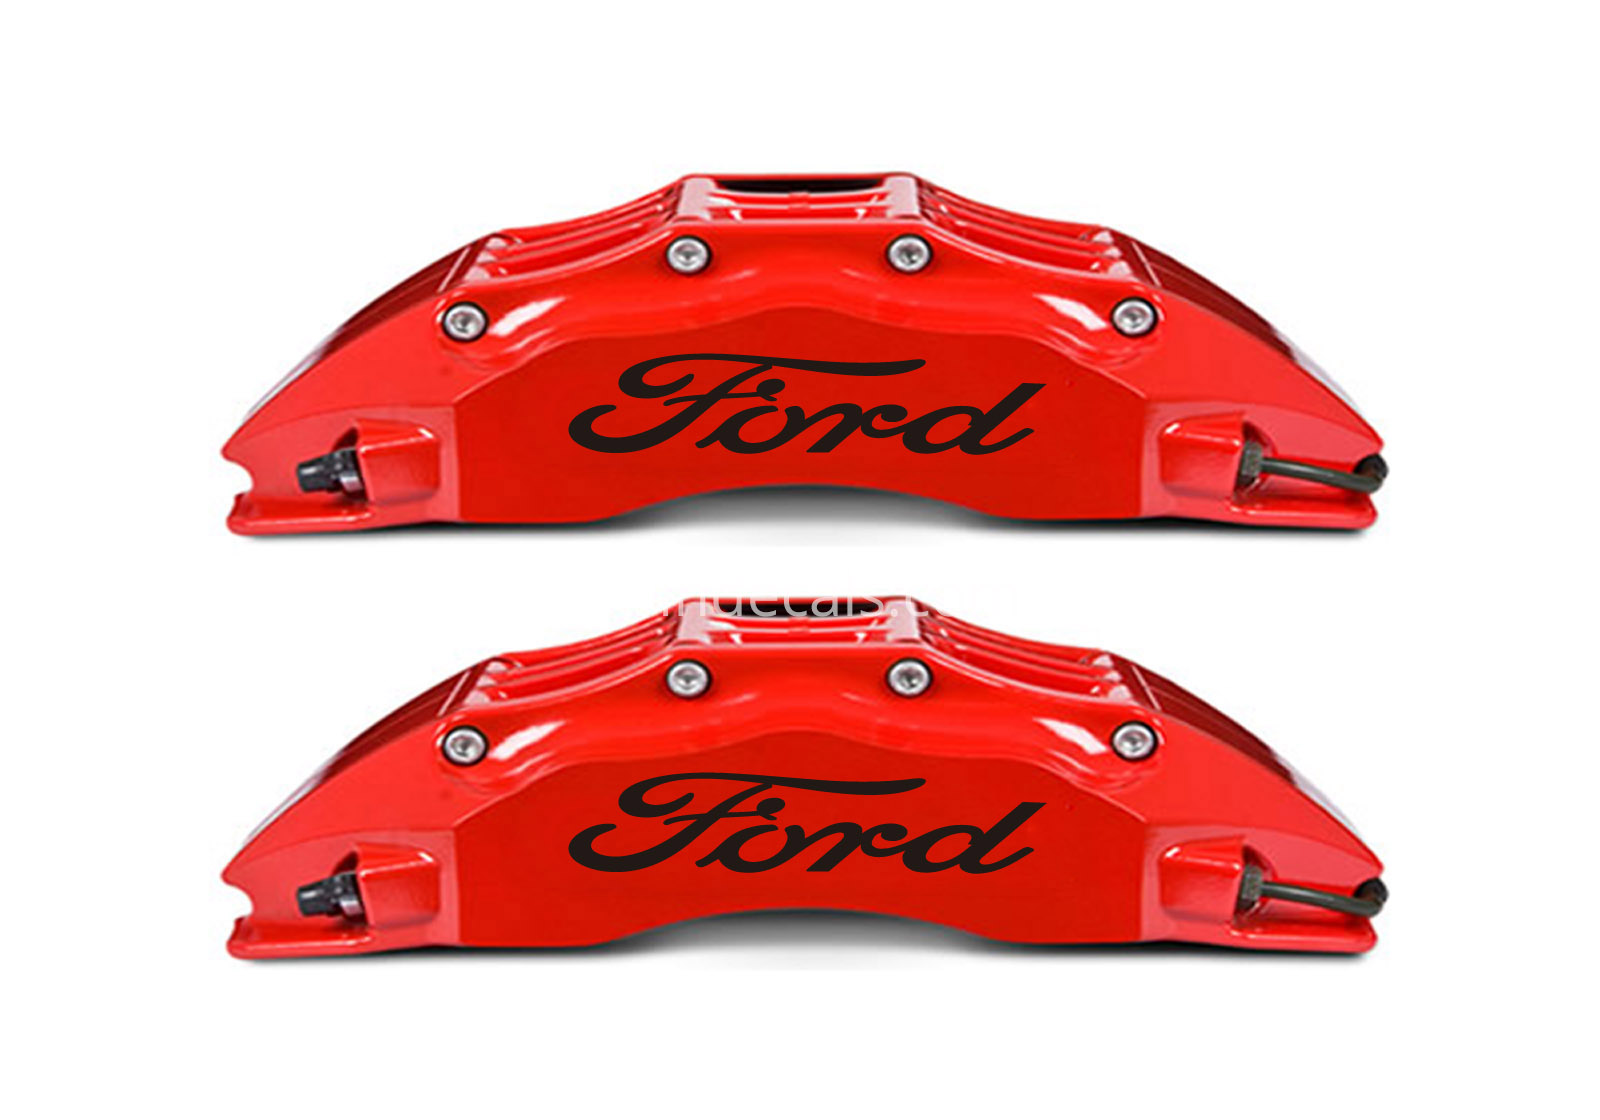 6 x Ford Stickers for Brakes - Black